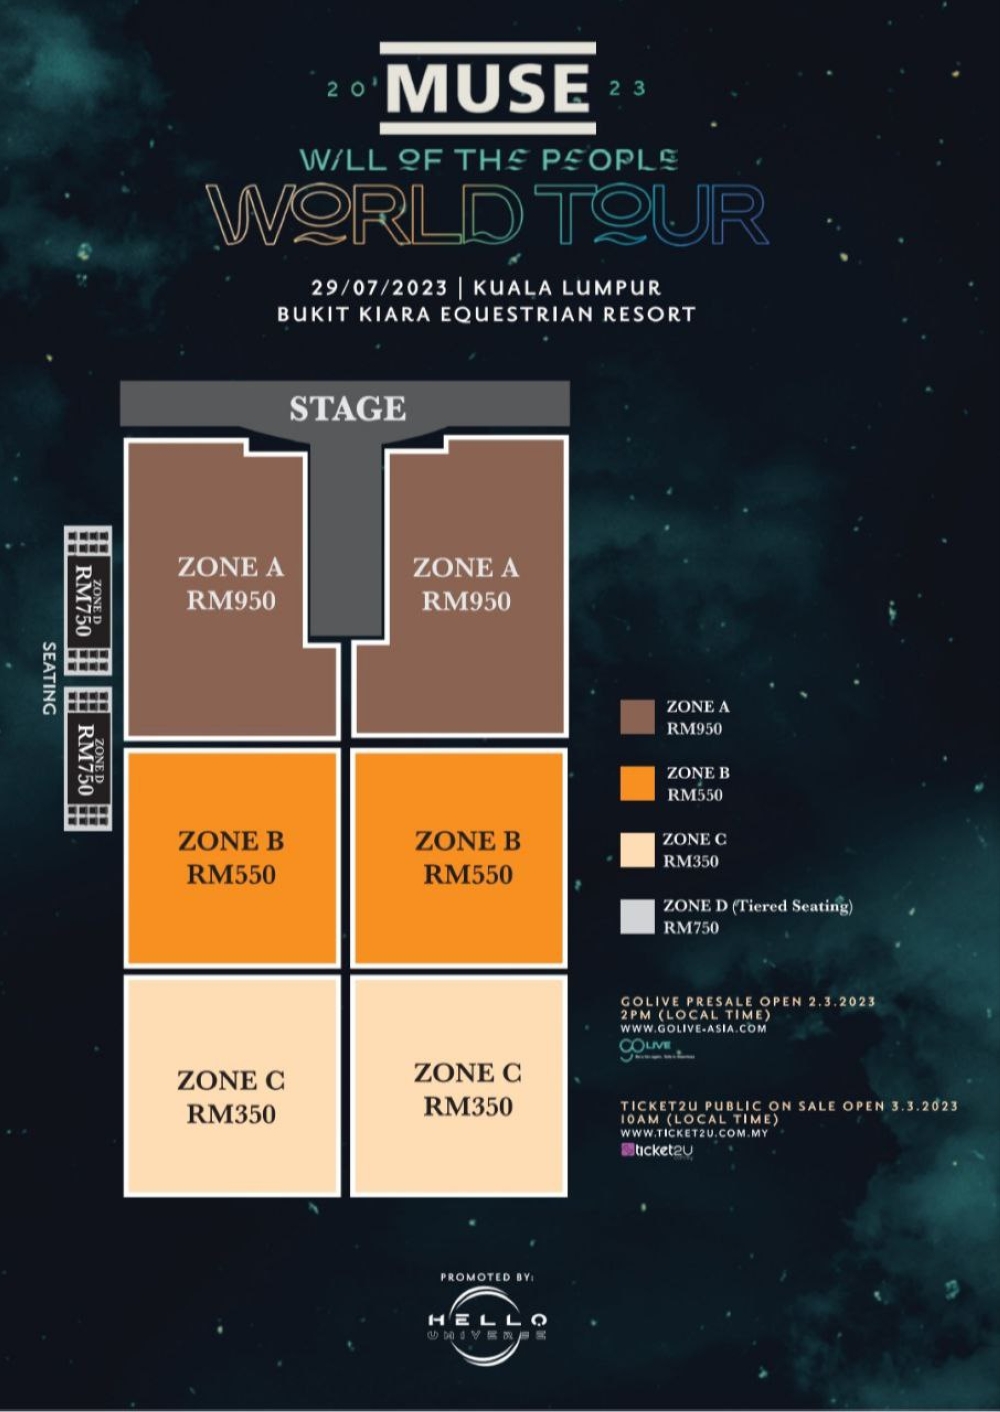 Zone arrangement for the upcoming Muse 'Will of the People' tour this July 29. — Picture courtesy of Hello Universe.